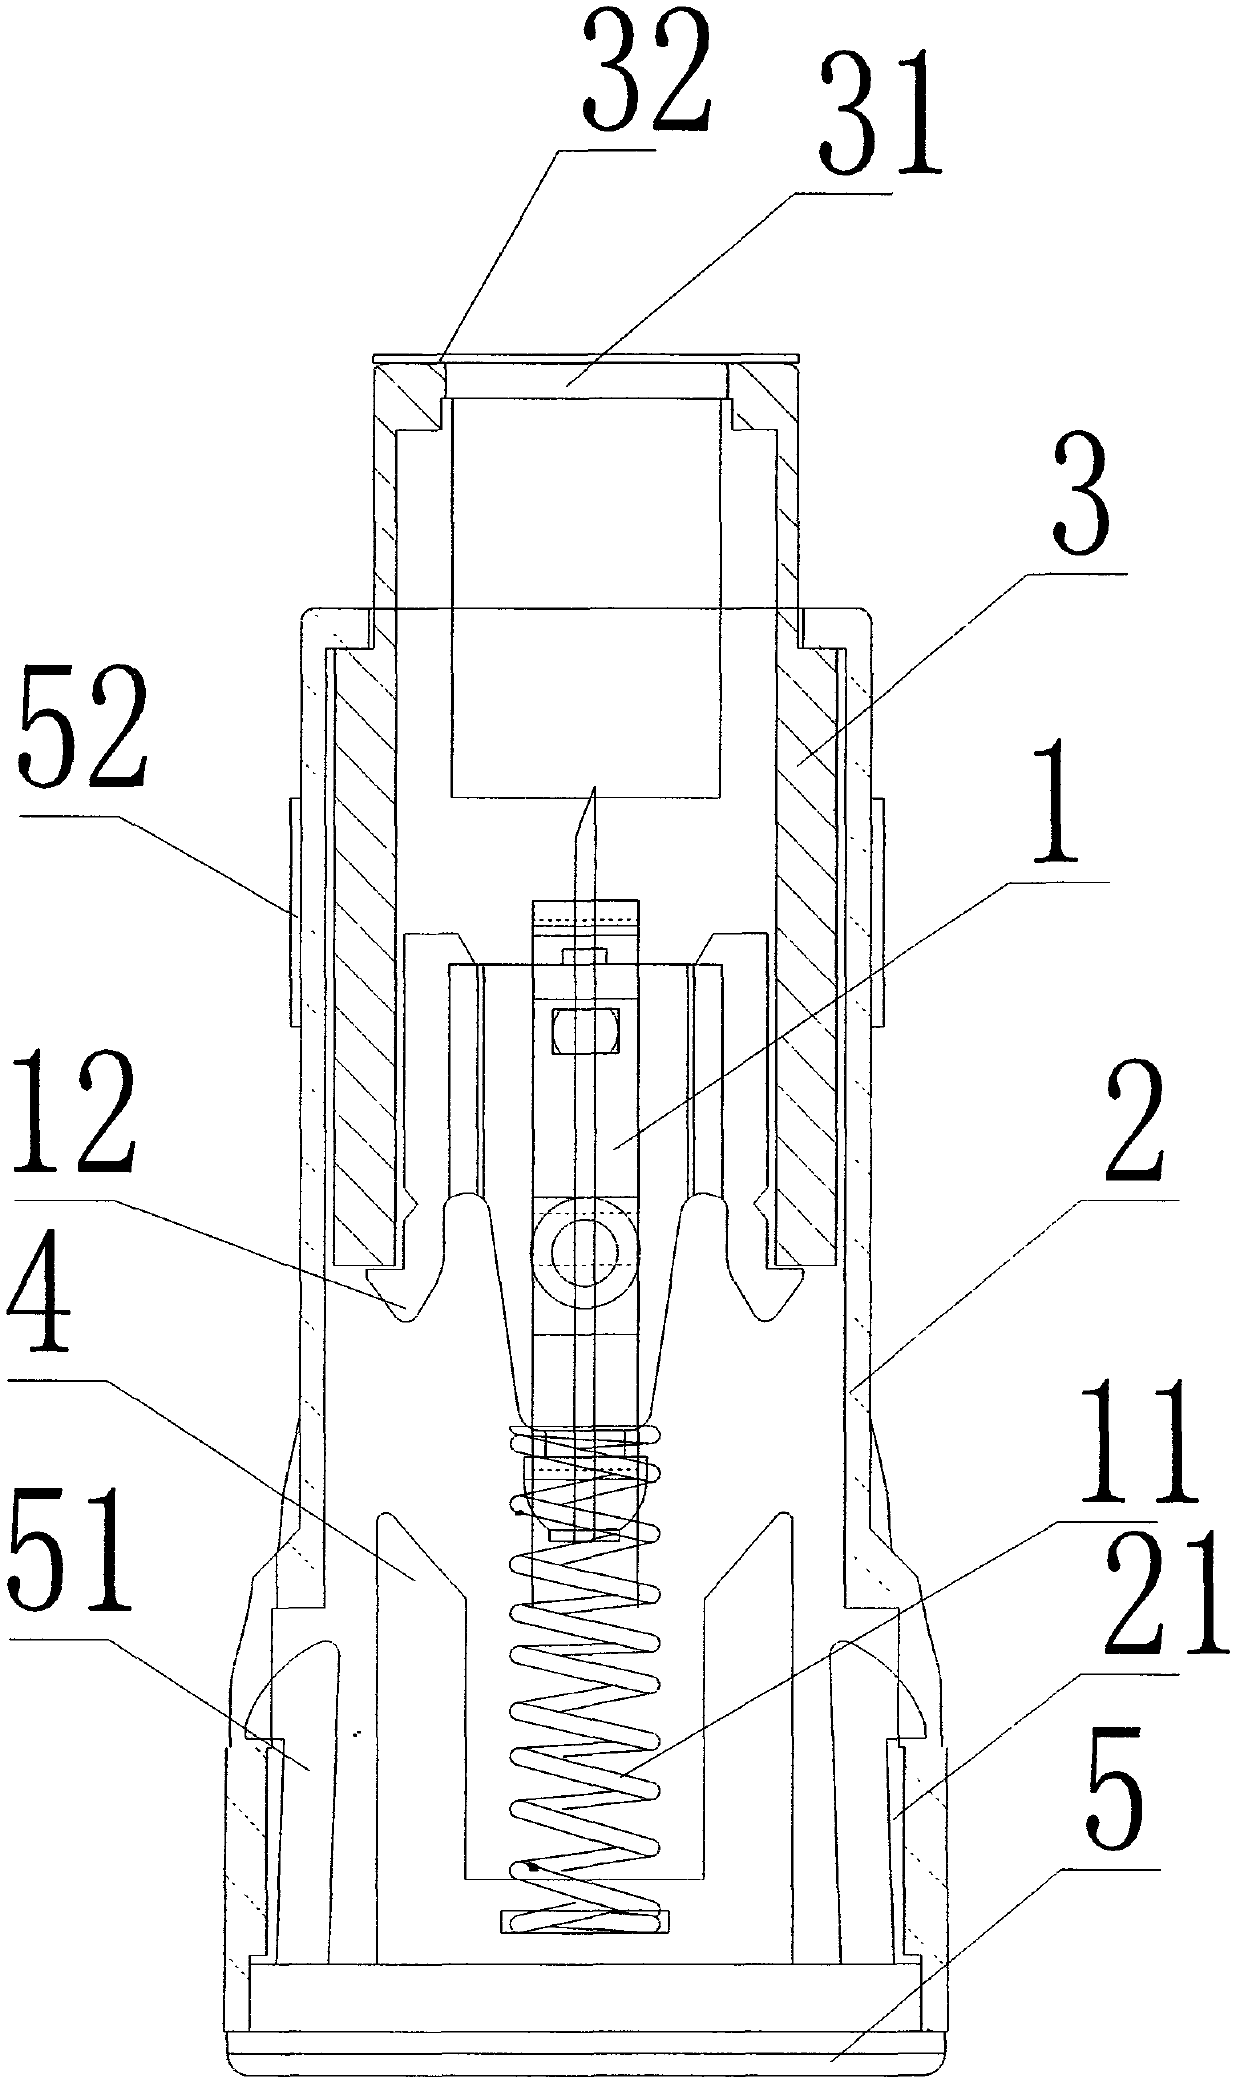 Disposable blood sampling device with pre-coded two-dimensional barcodes